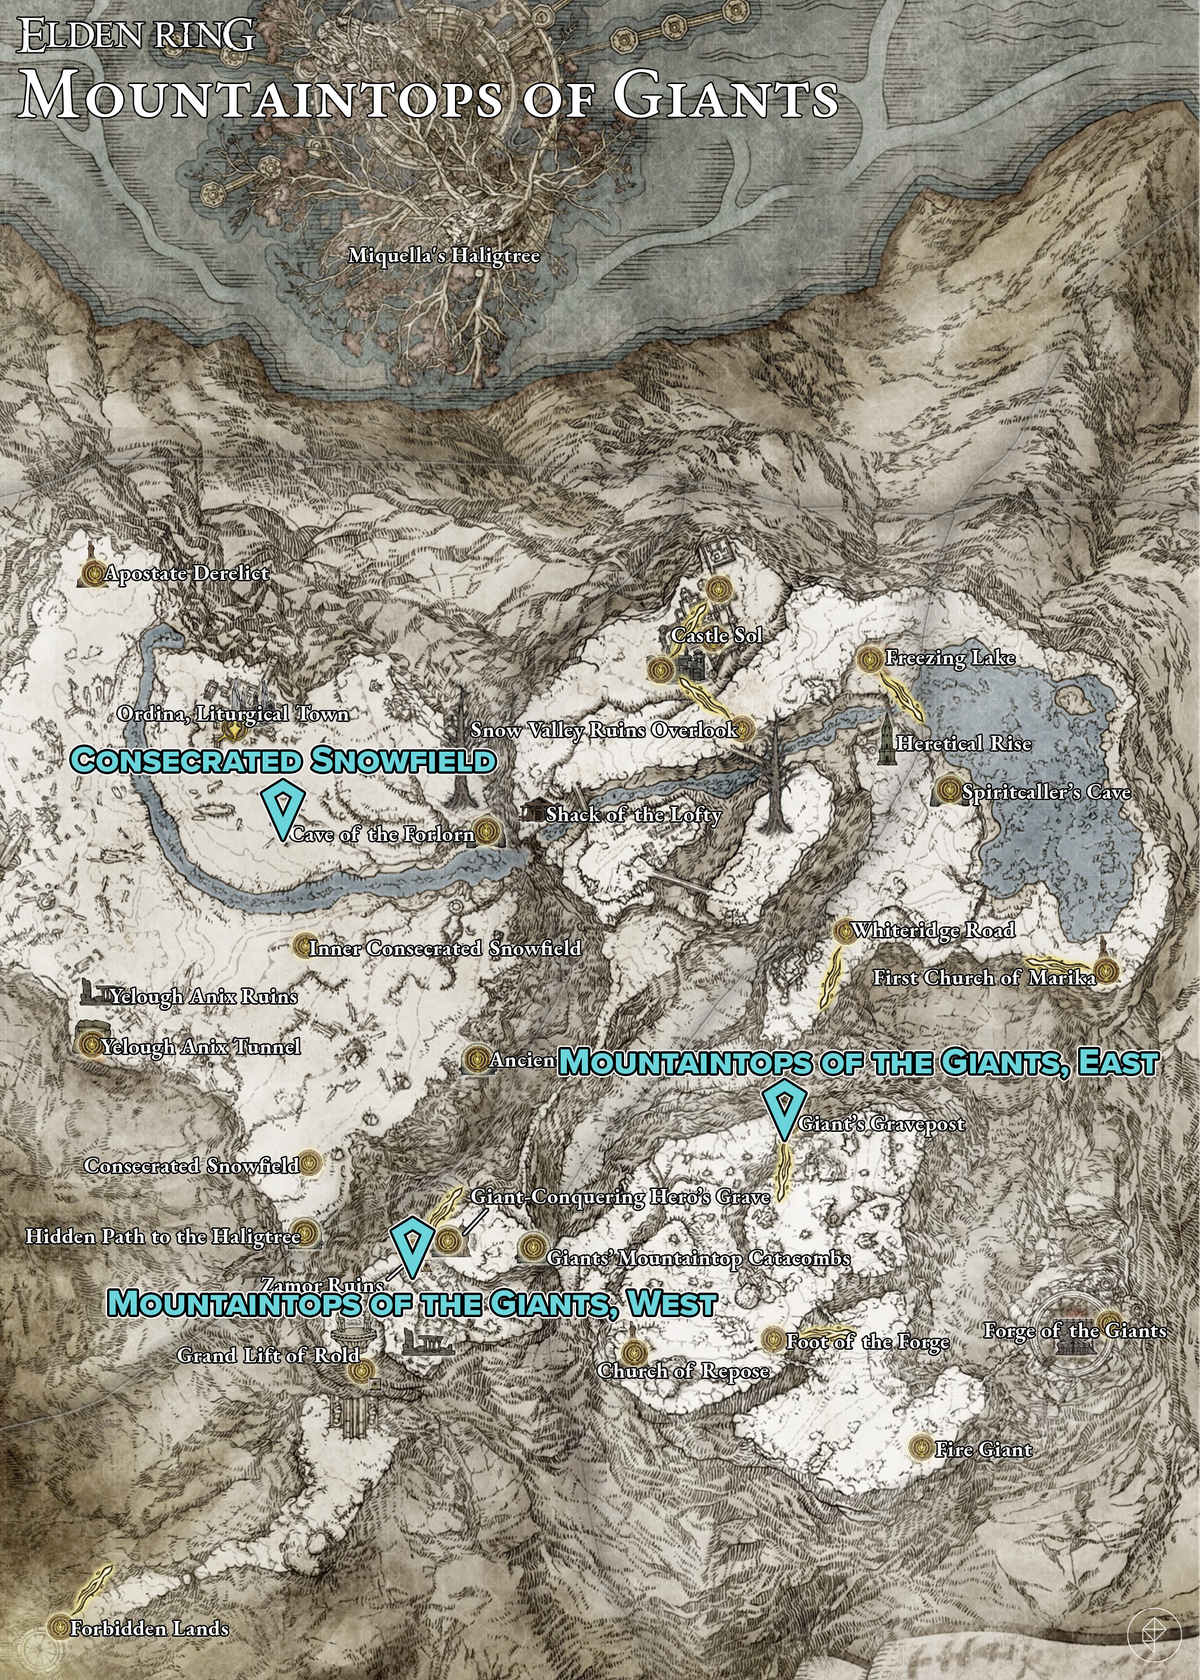 Map showing Mountaintops of the Giants map fragment stele locations 